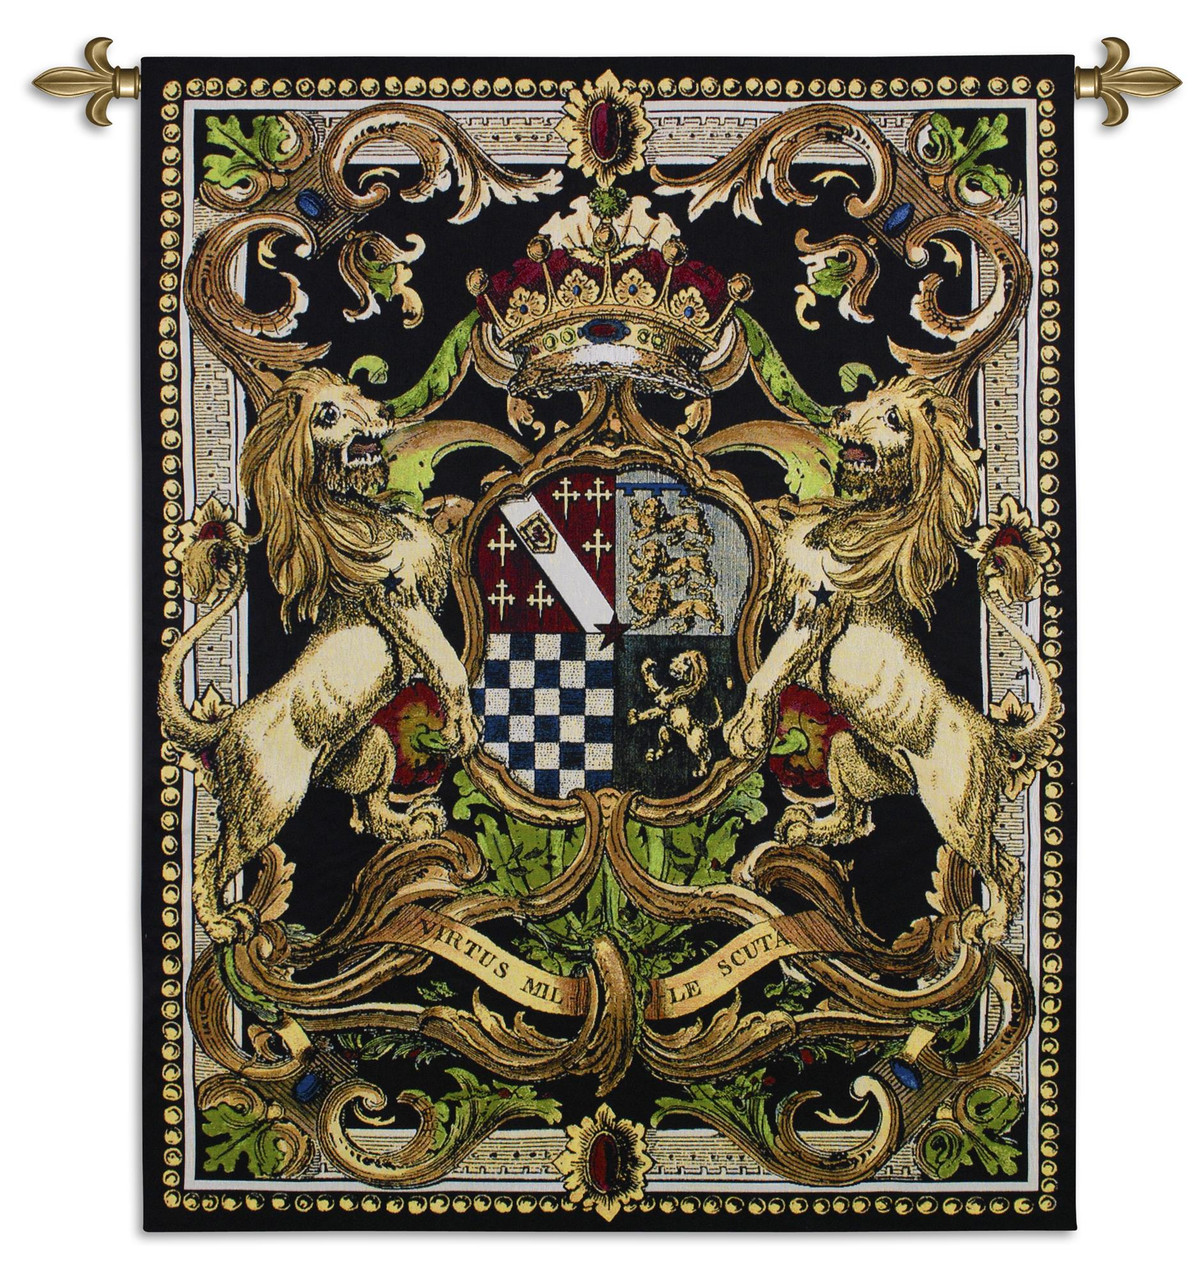 Crest on Black II Woven Tapestry Wall Art Hanging Medieval Royal  Heraldic Crest 100% Cotton USA Size 53x41